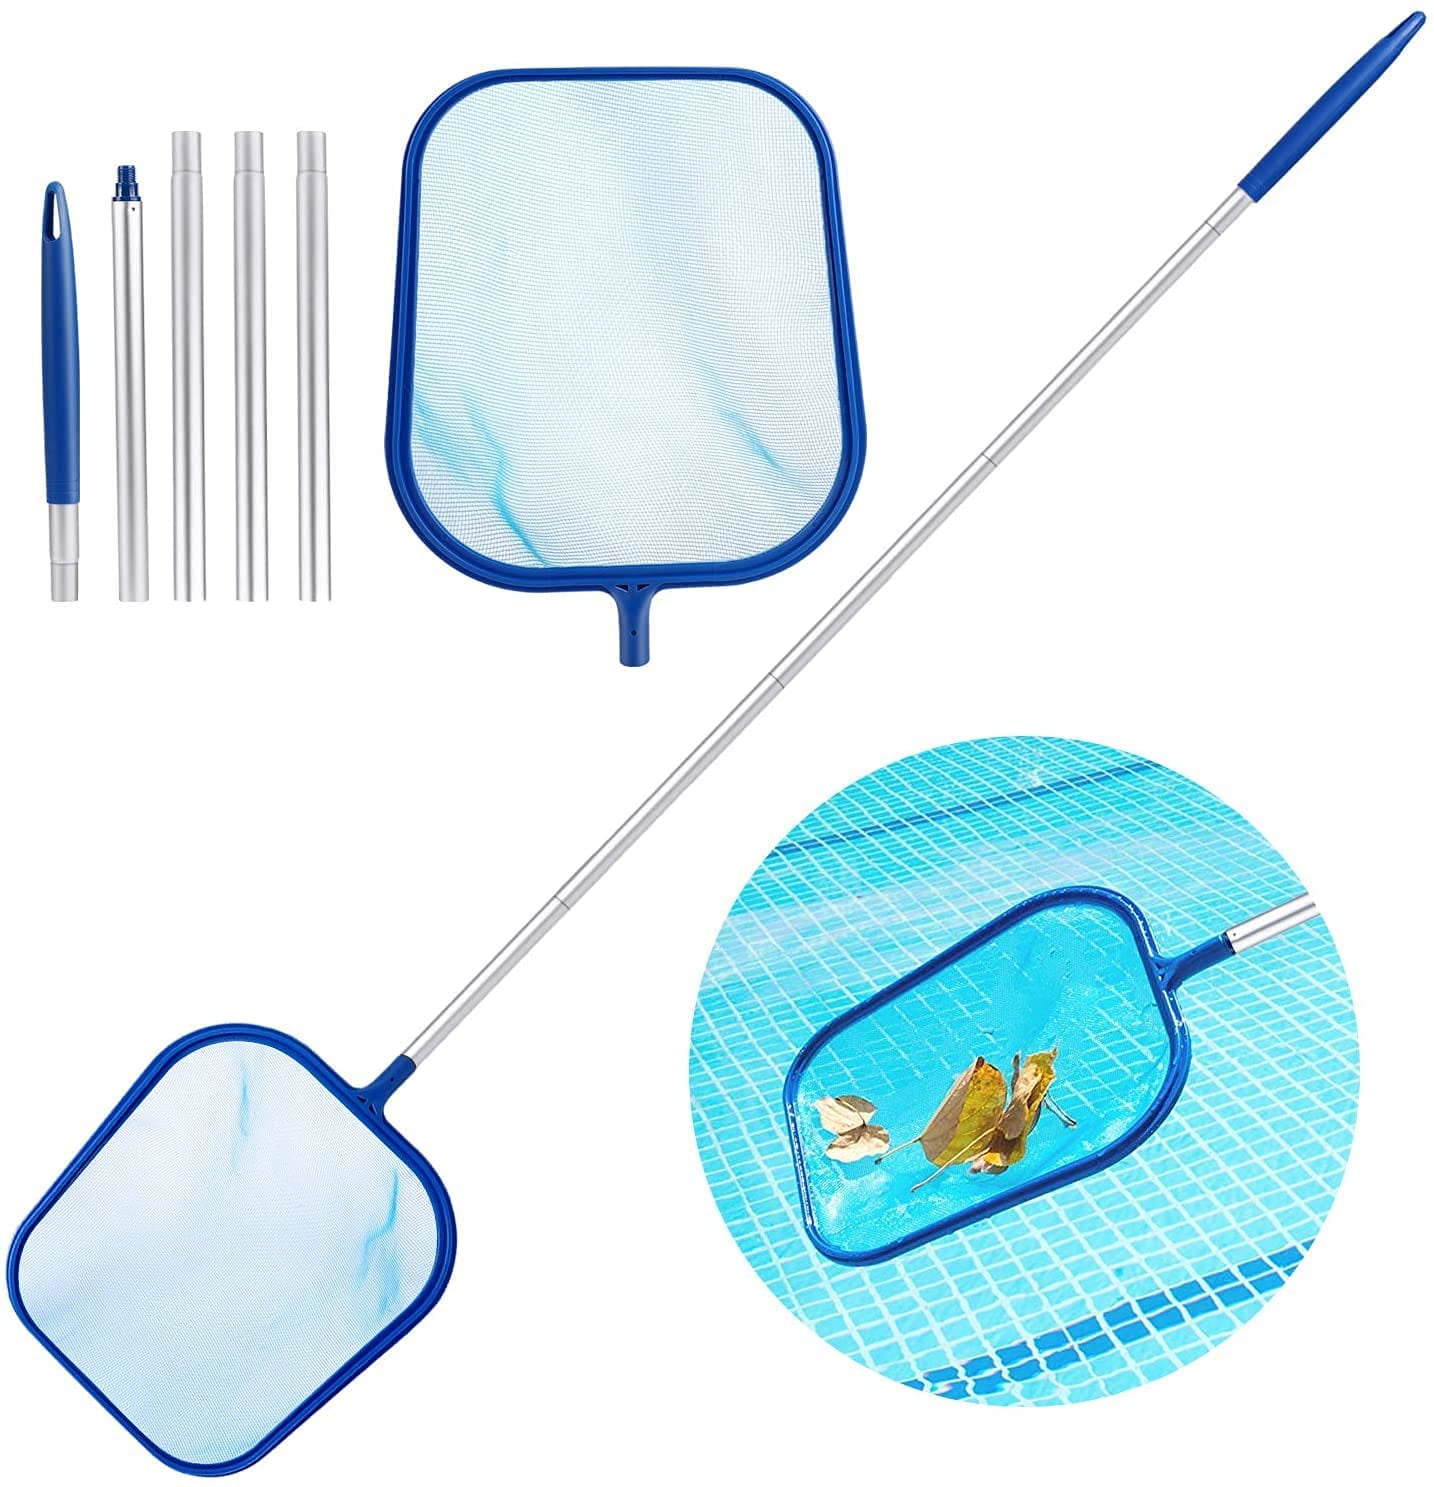 Fine Mesh Skimming Pool Net with 5-Section Aluminum Pole for Cleaning Swimming Pool Hot Tub and Spa Garden Pond Hemoton Pool Leaf Skimmer